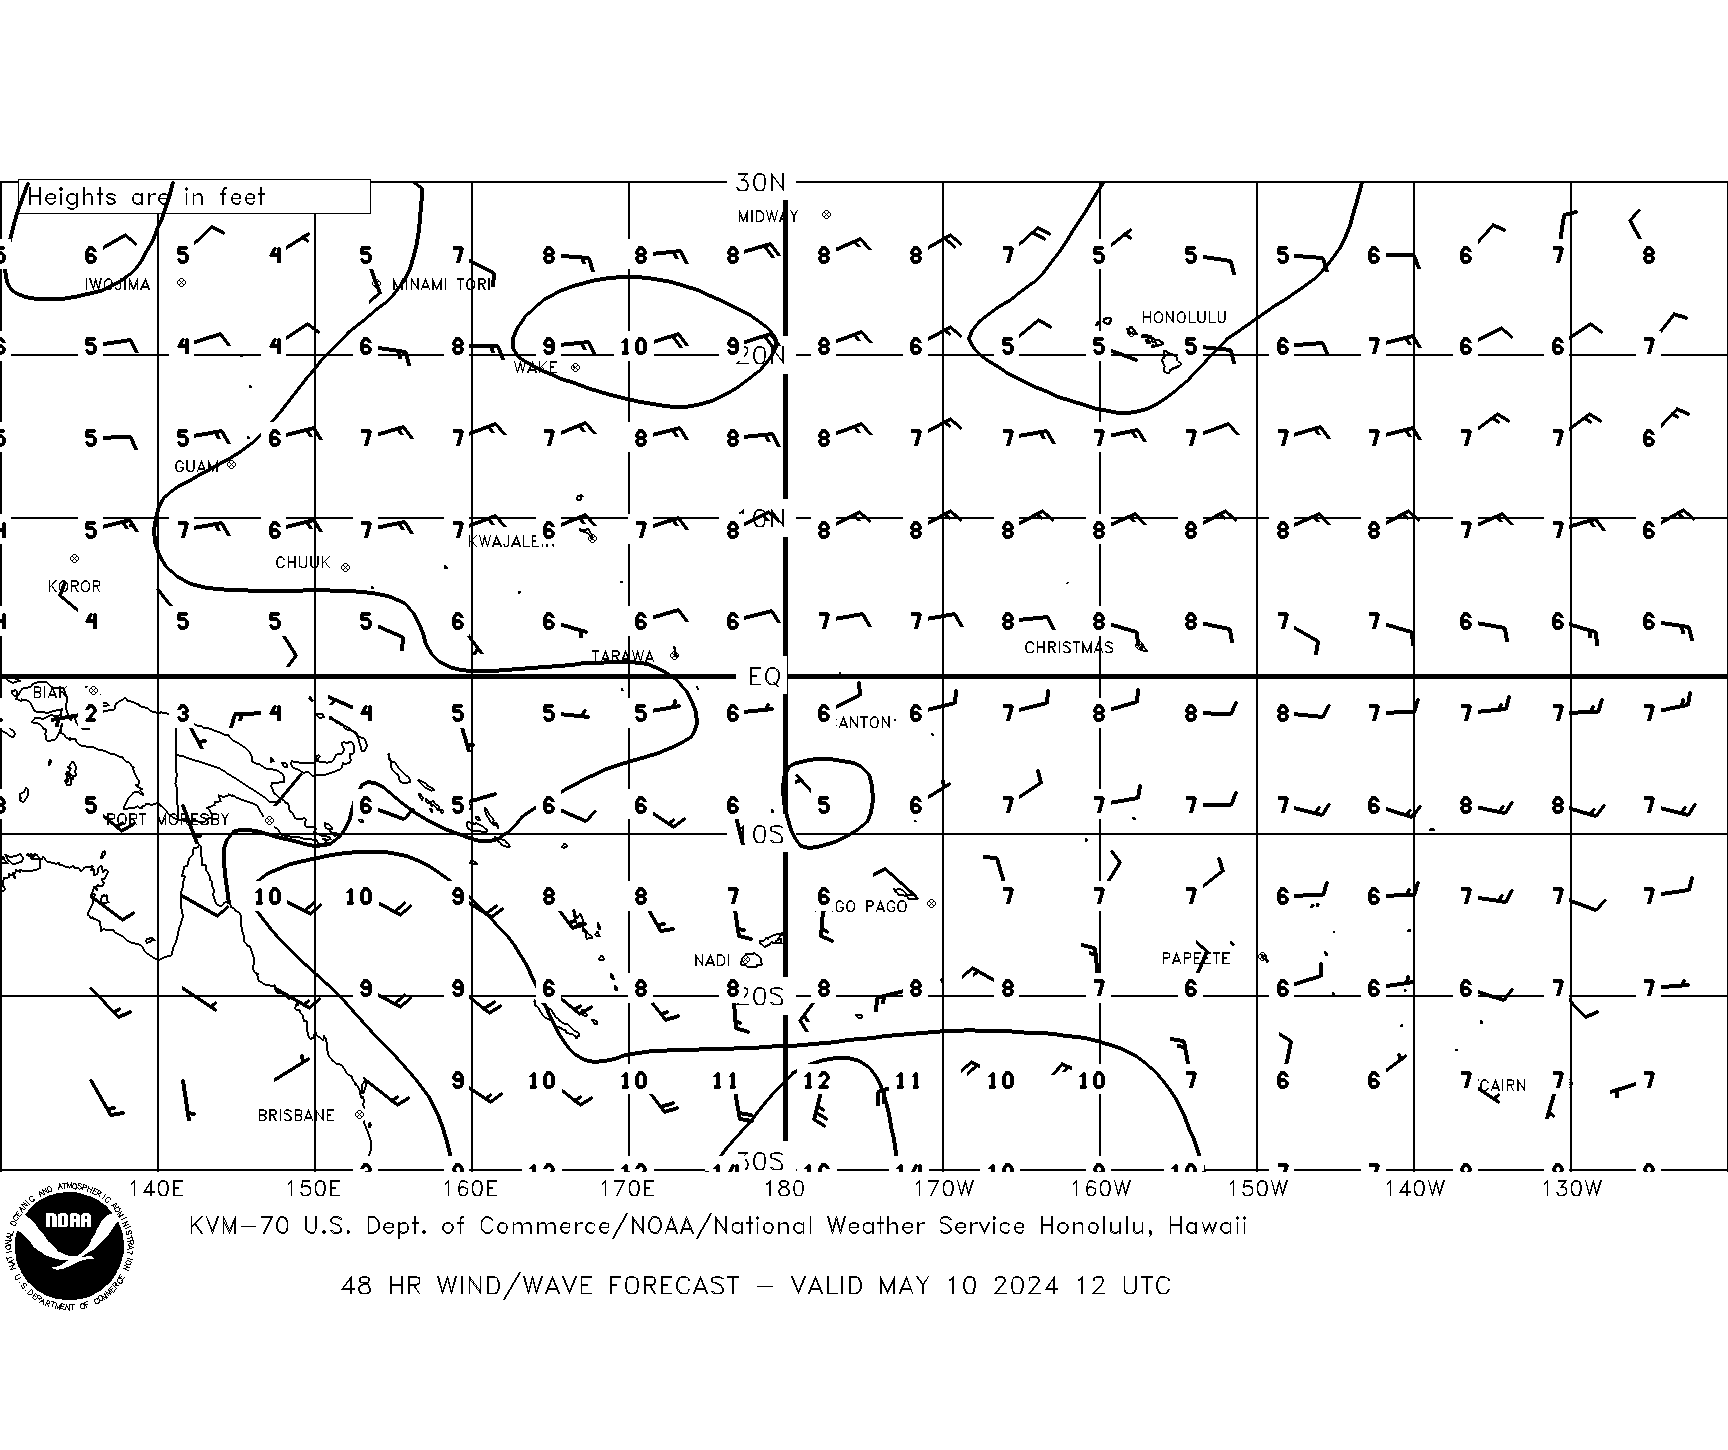 48 HR Pacific Sea State Forecast